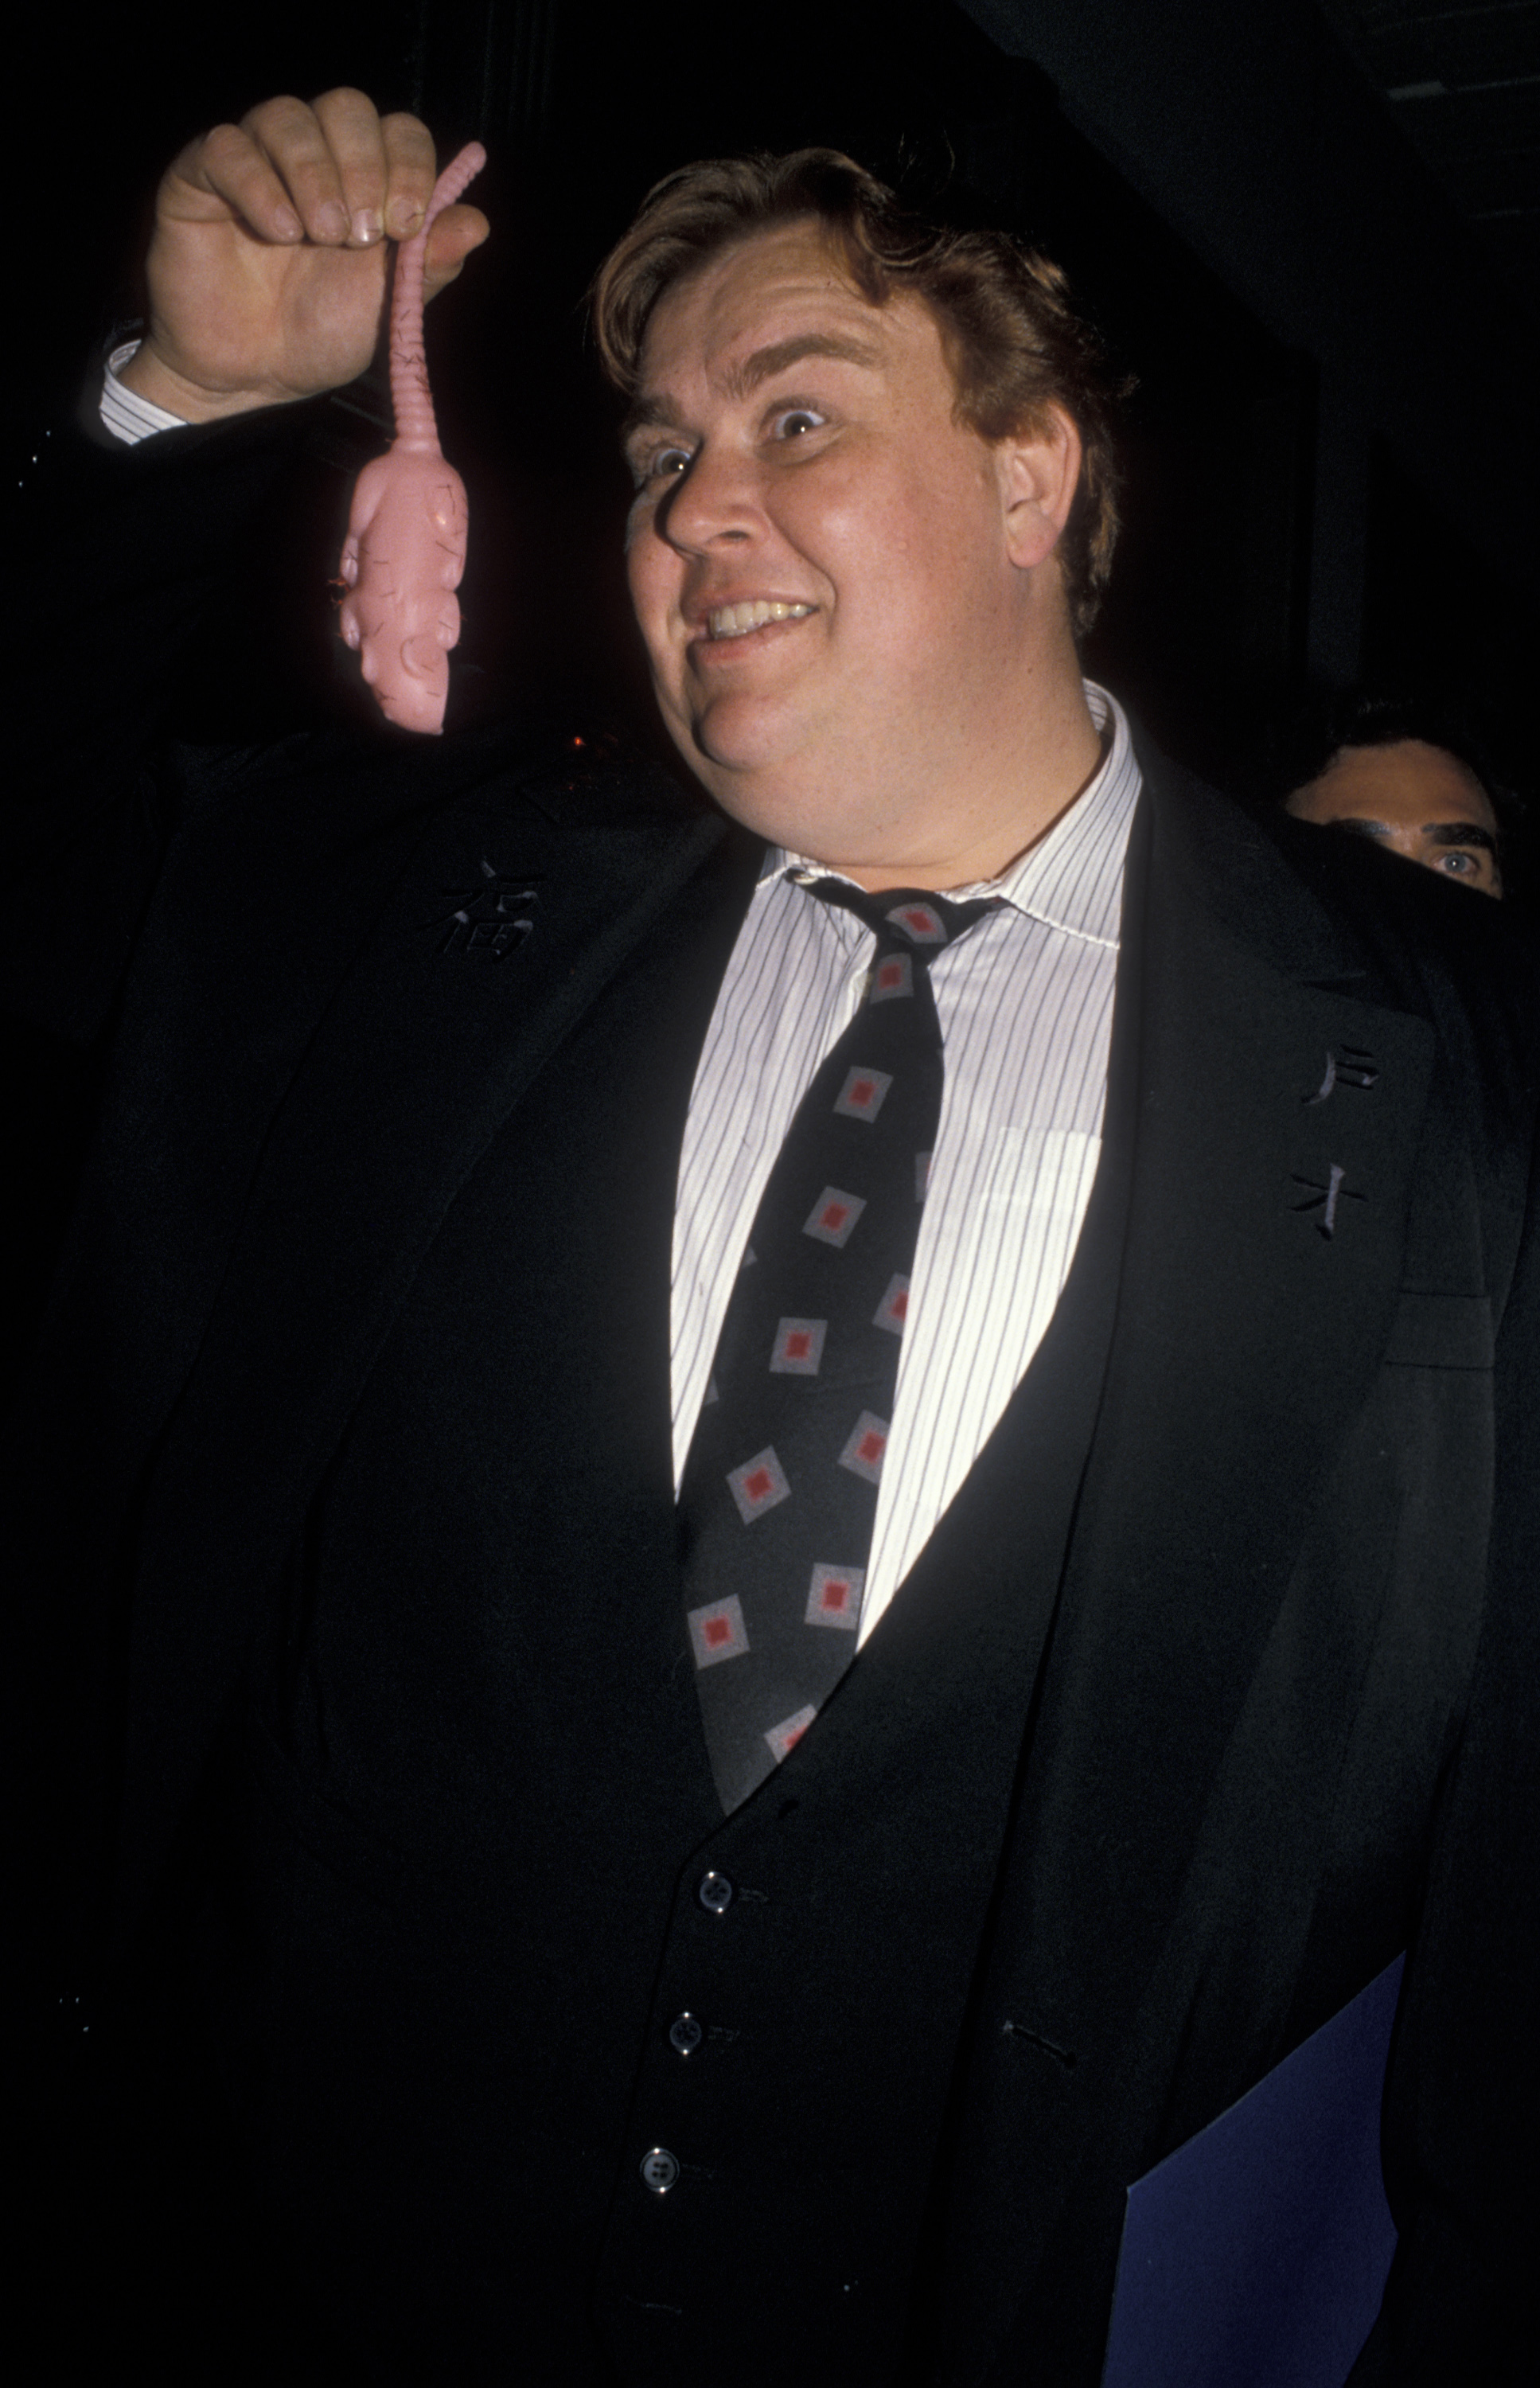 John Candy at the "Halloween For Hope Benefit" on October 28, 1988, in California. | Source: Getty Images